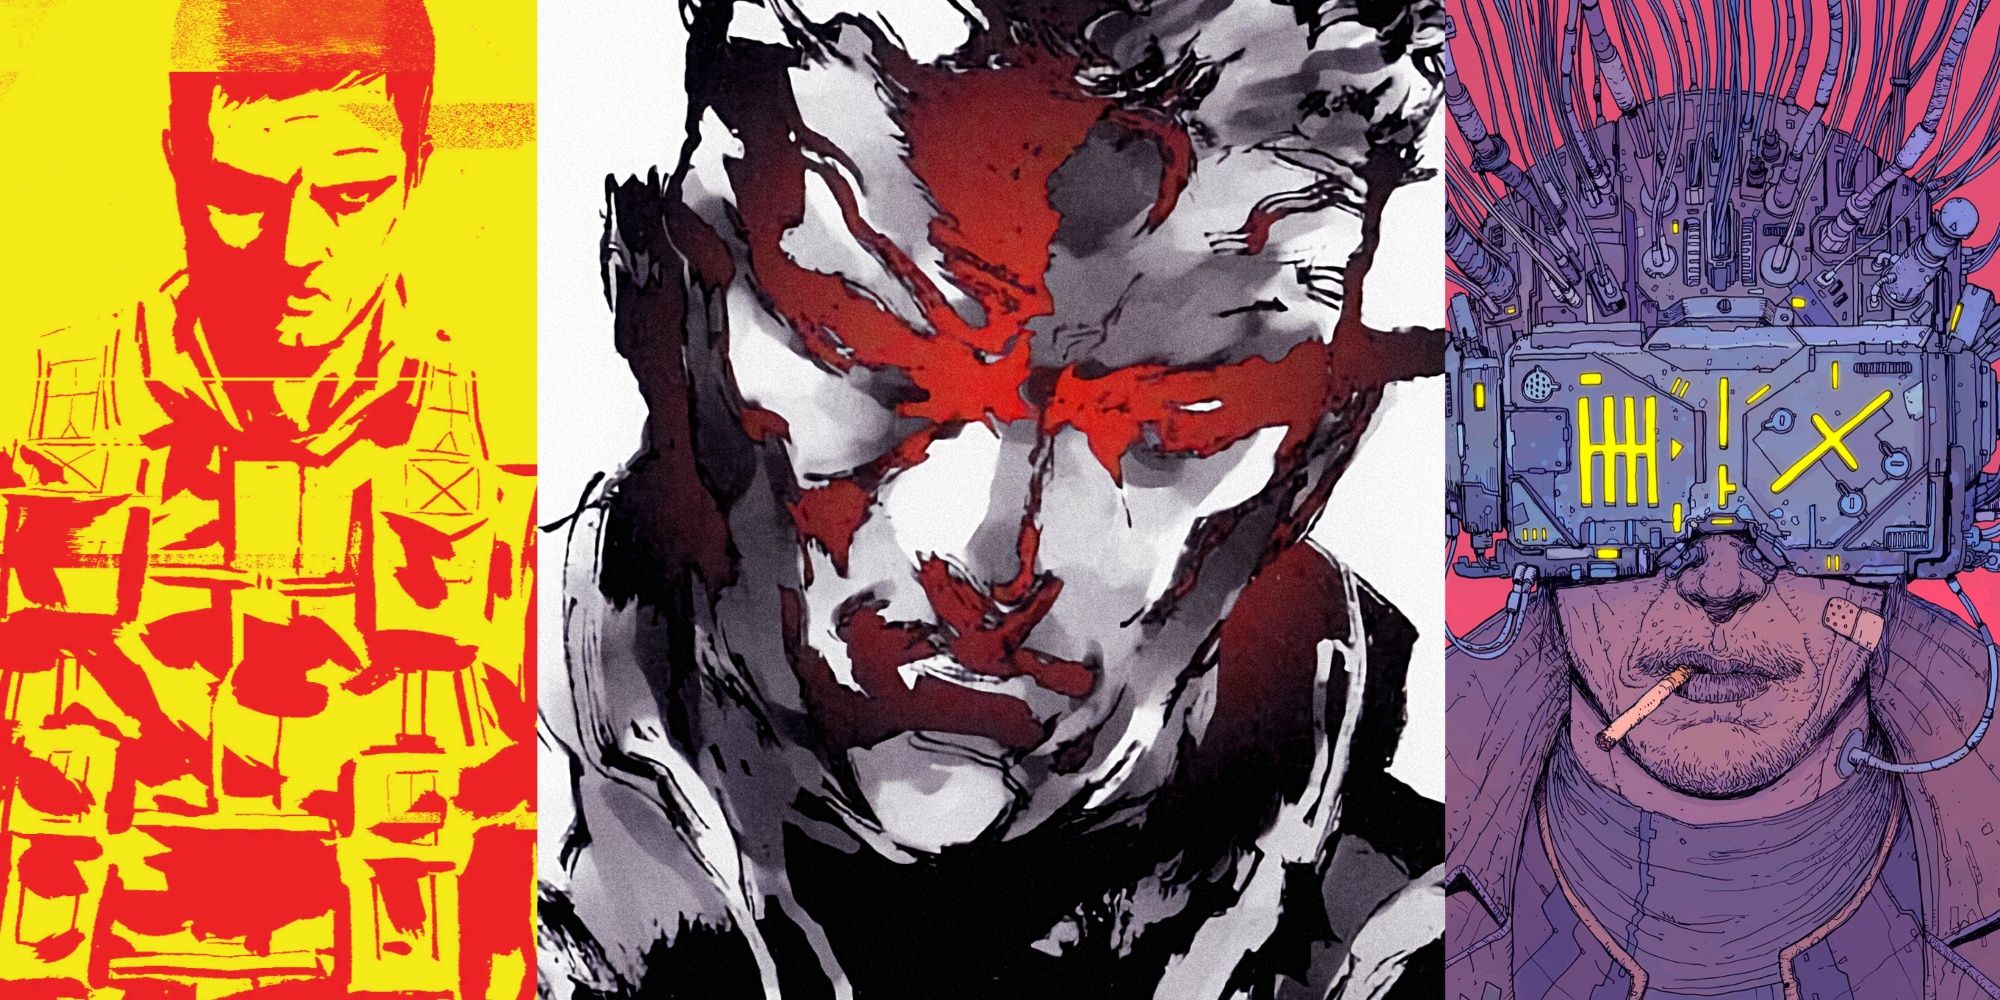 Covers of Metal Gear Solid, Zero and Neuromancer